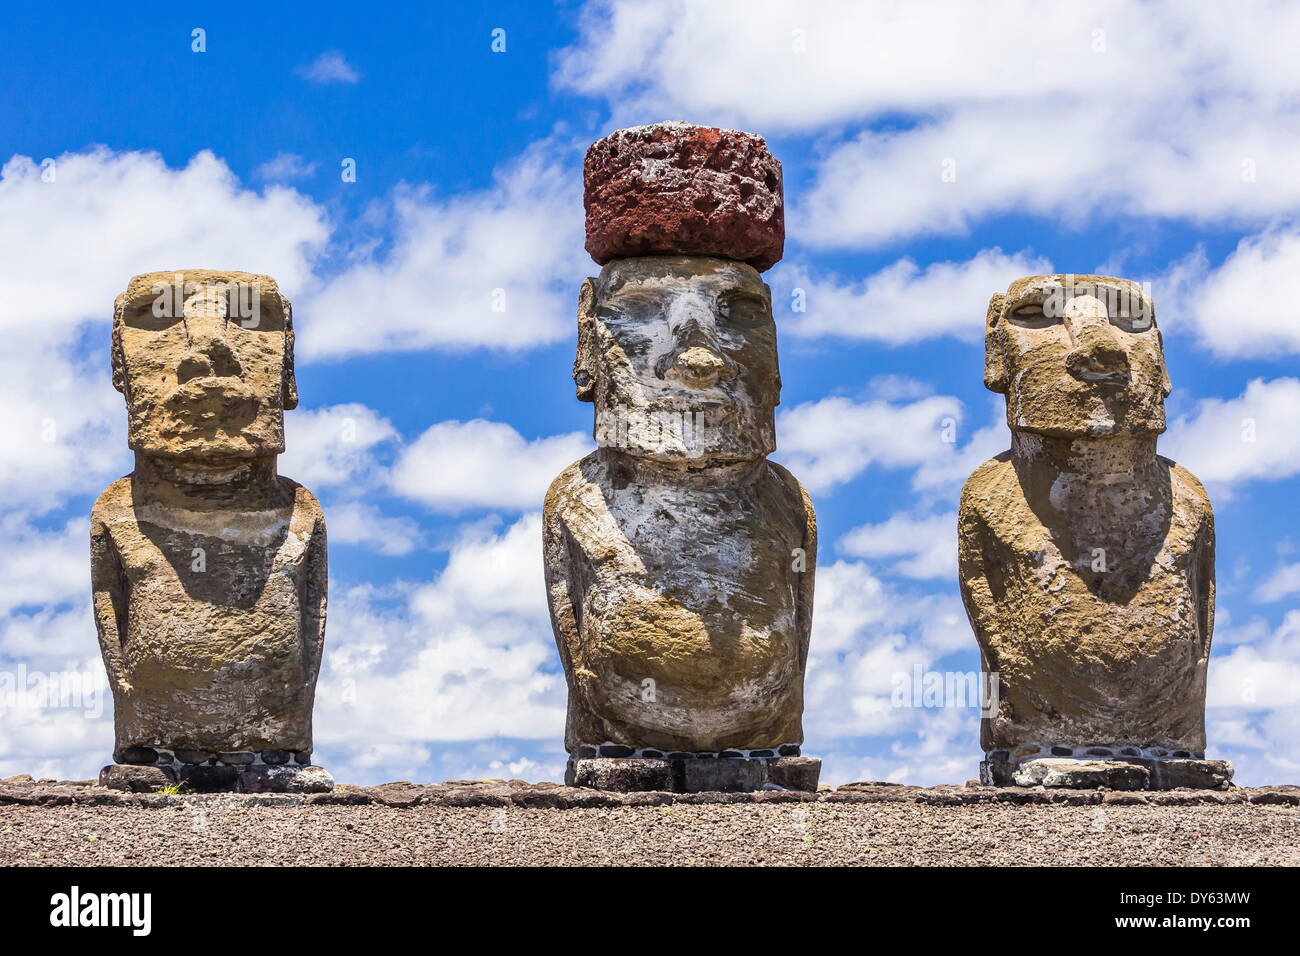 Details of moai at the restored ceremonial site of Ahu Tongariki on Easter Island (Rapa Nui), UNESCO Site, Chile Stock Photo